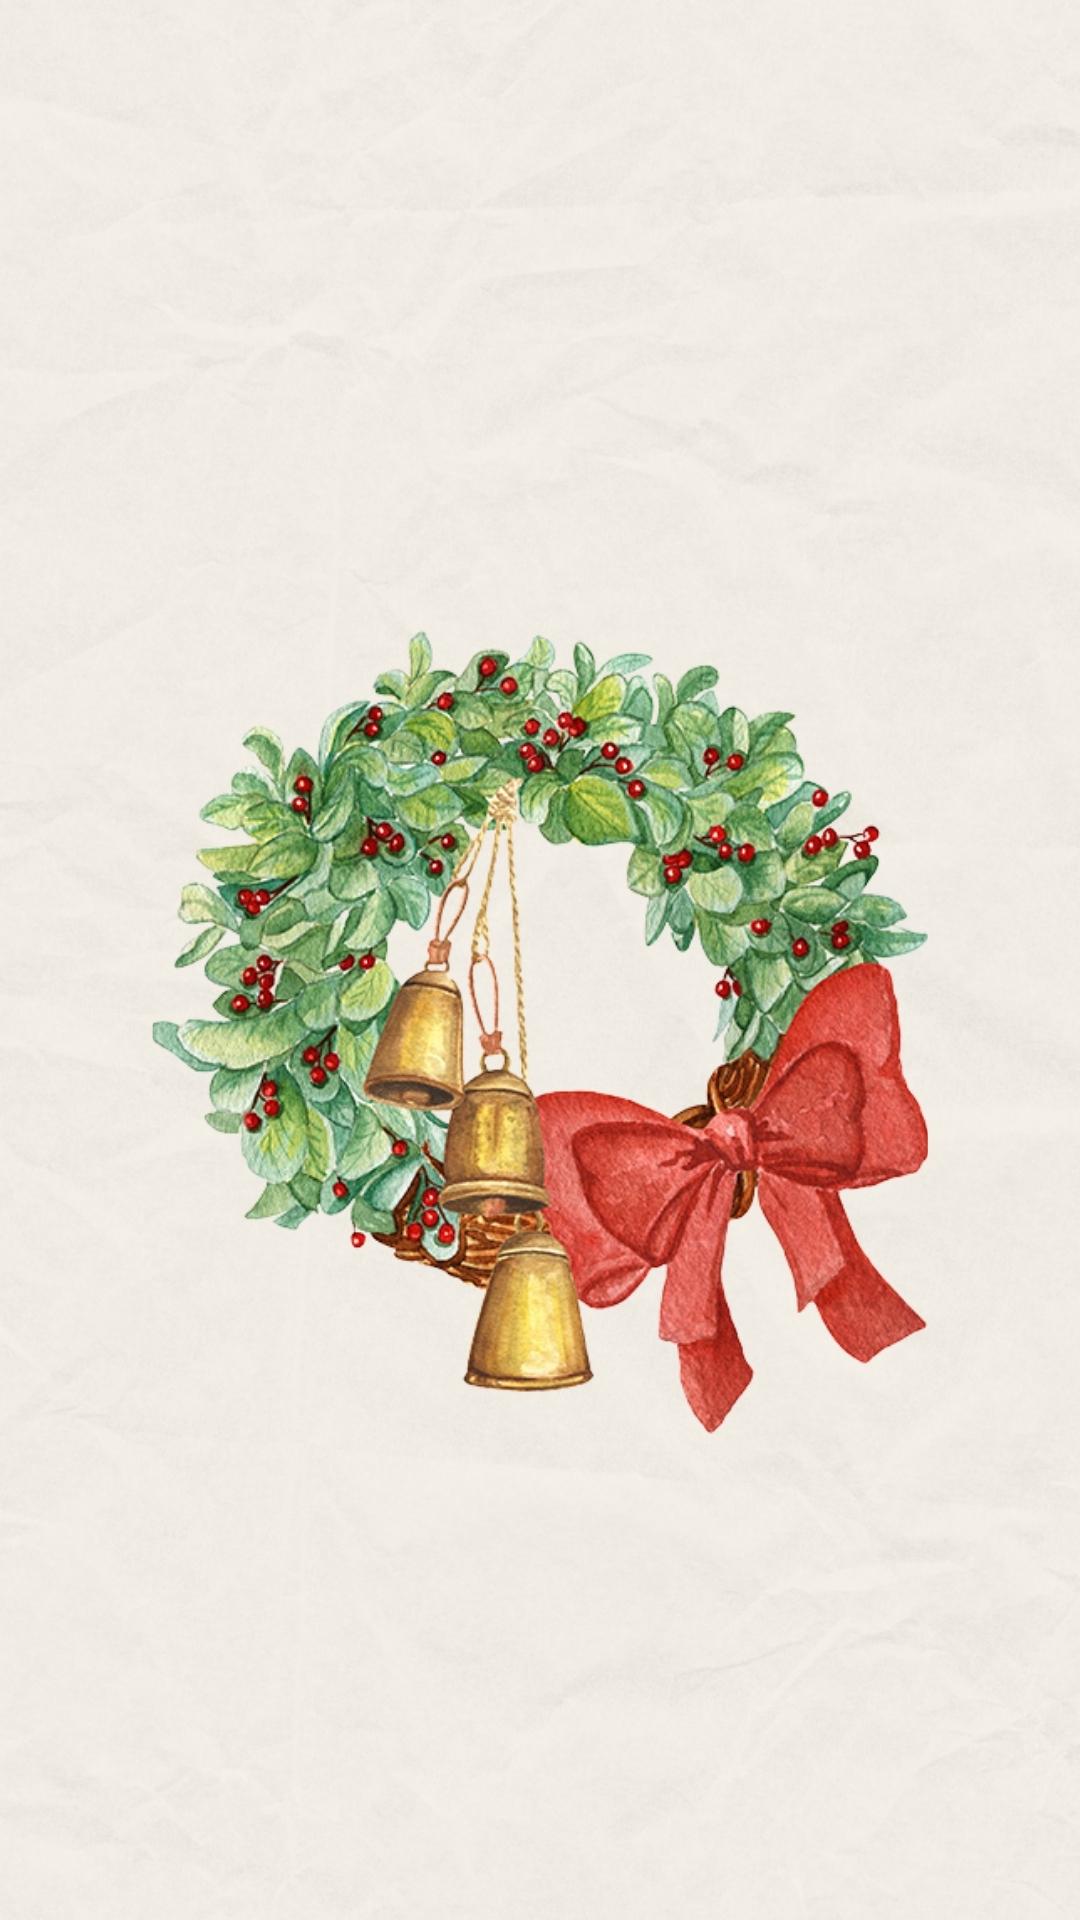 25 Free Christmas Wallpapers for iPhone  Cute and Vintage Backgrounds